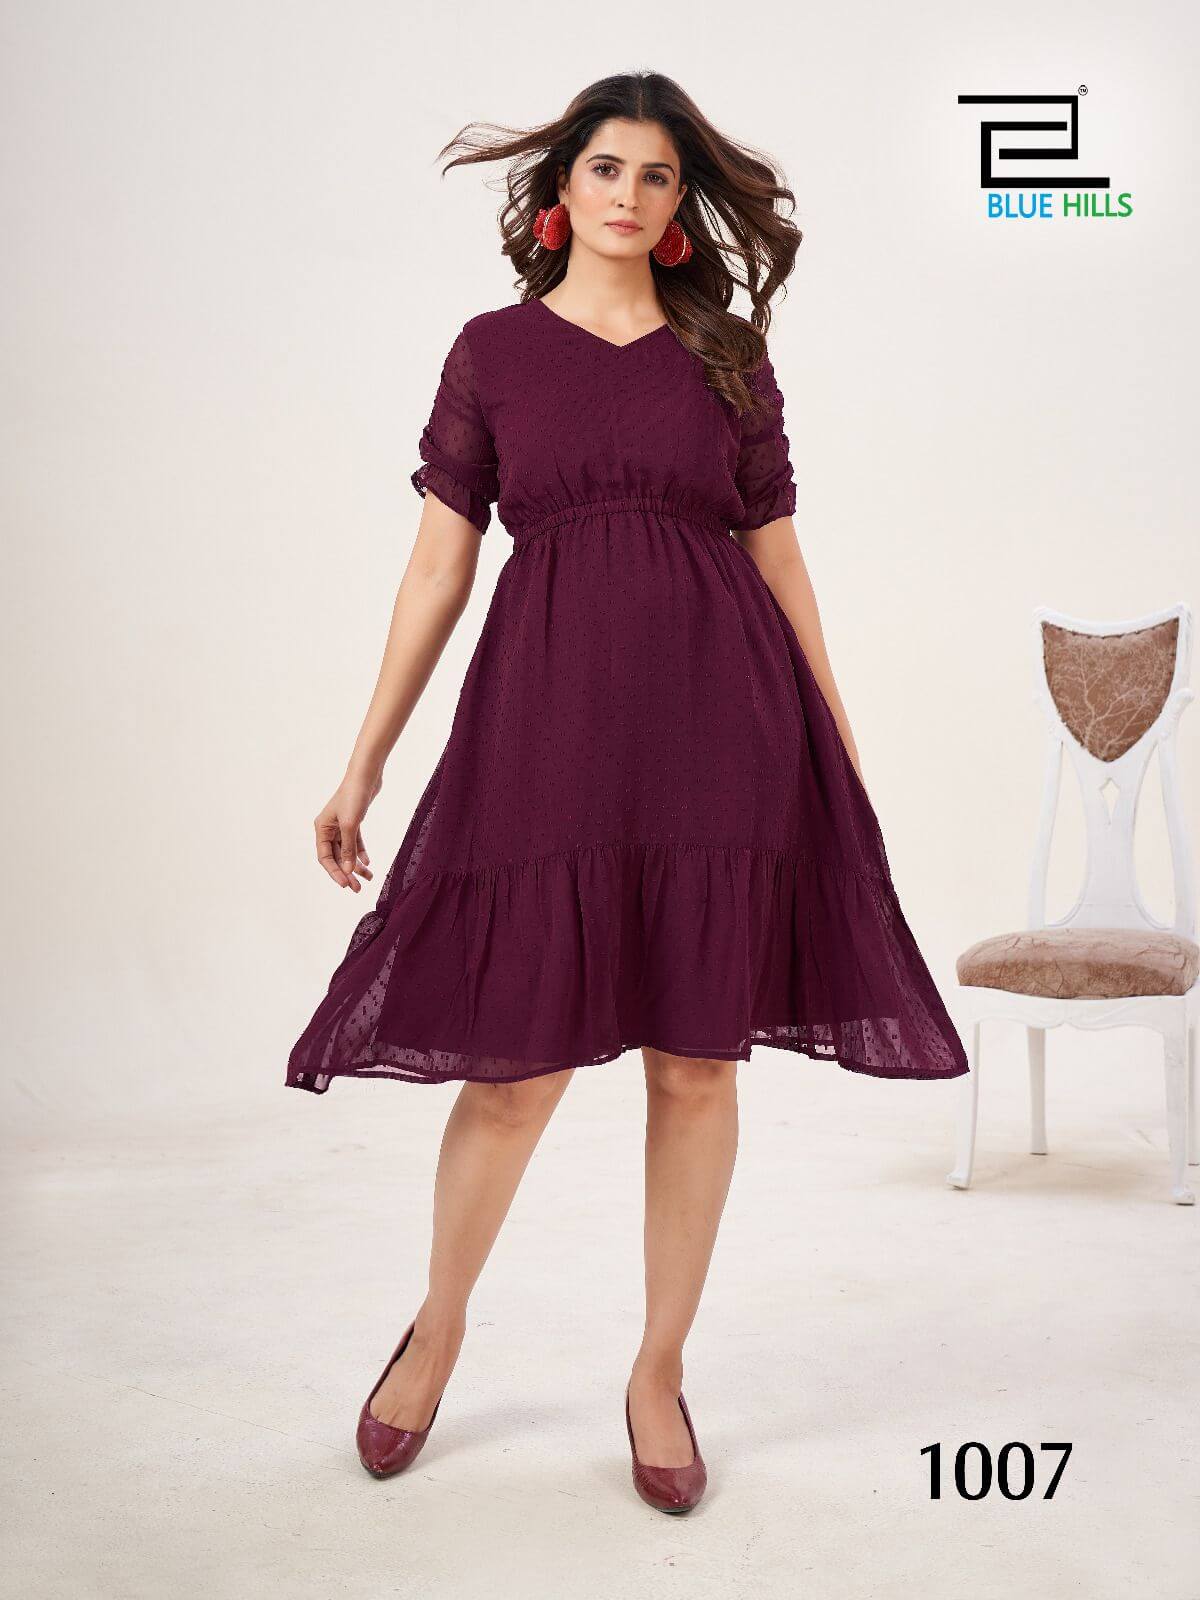 Blue Hills Charming One Piece Dress Catalog collection 3